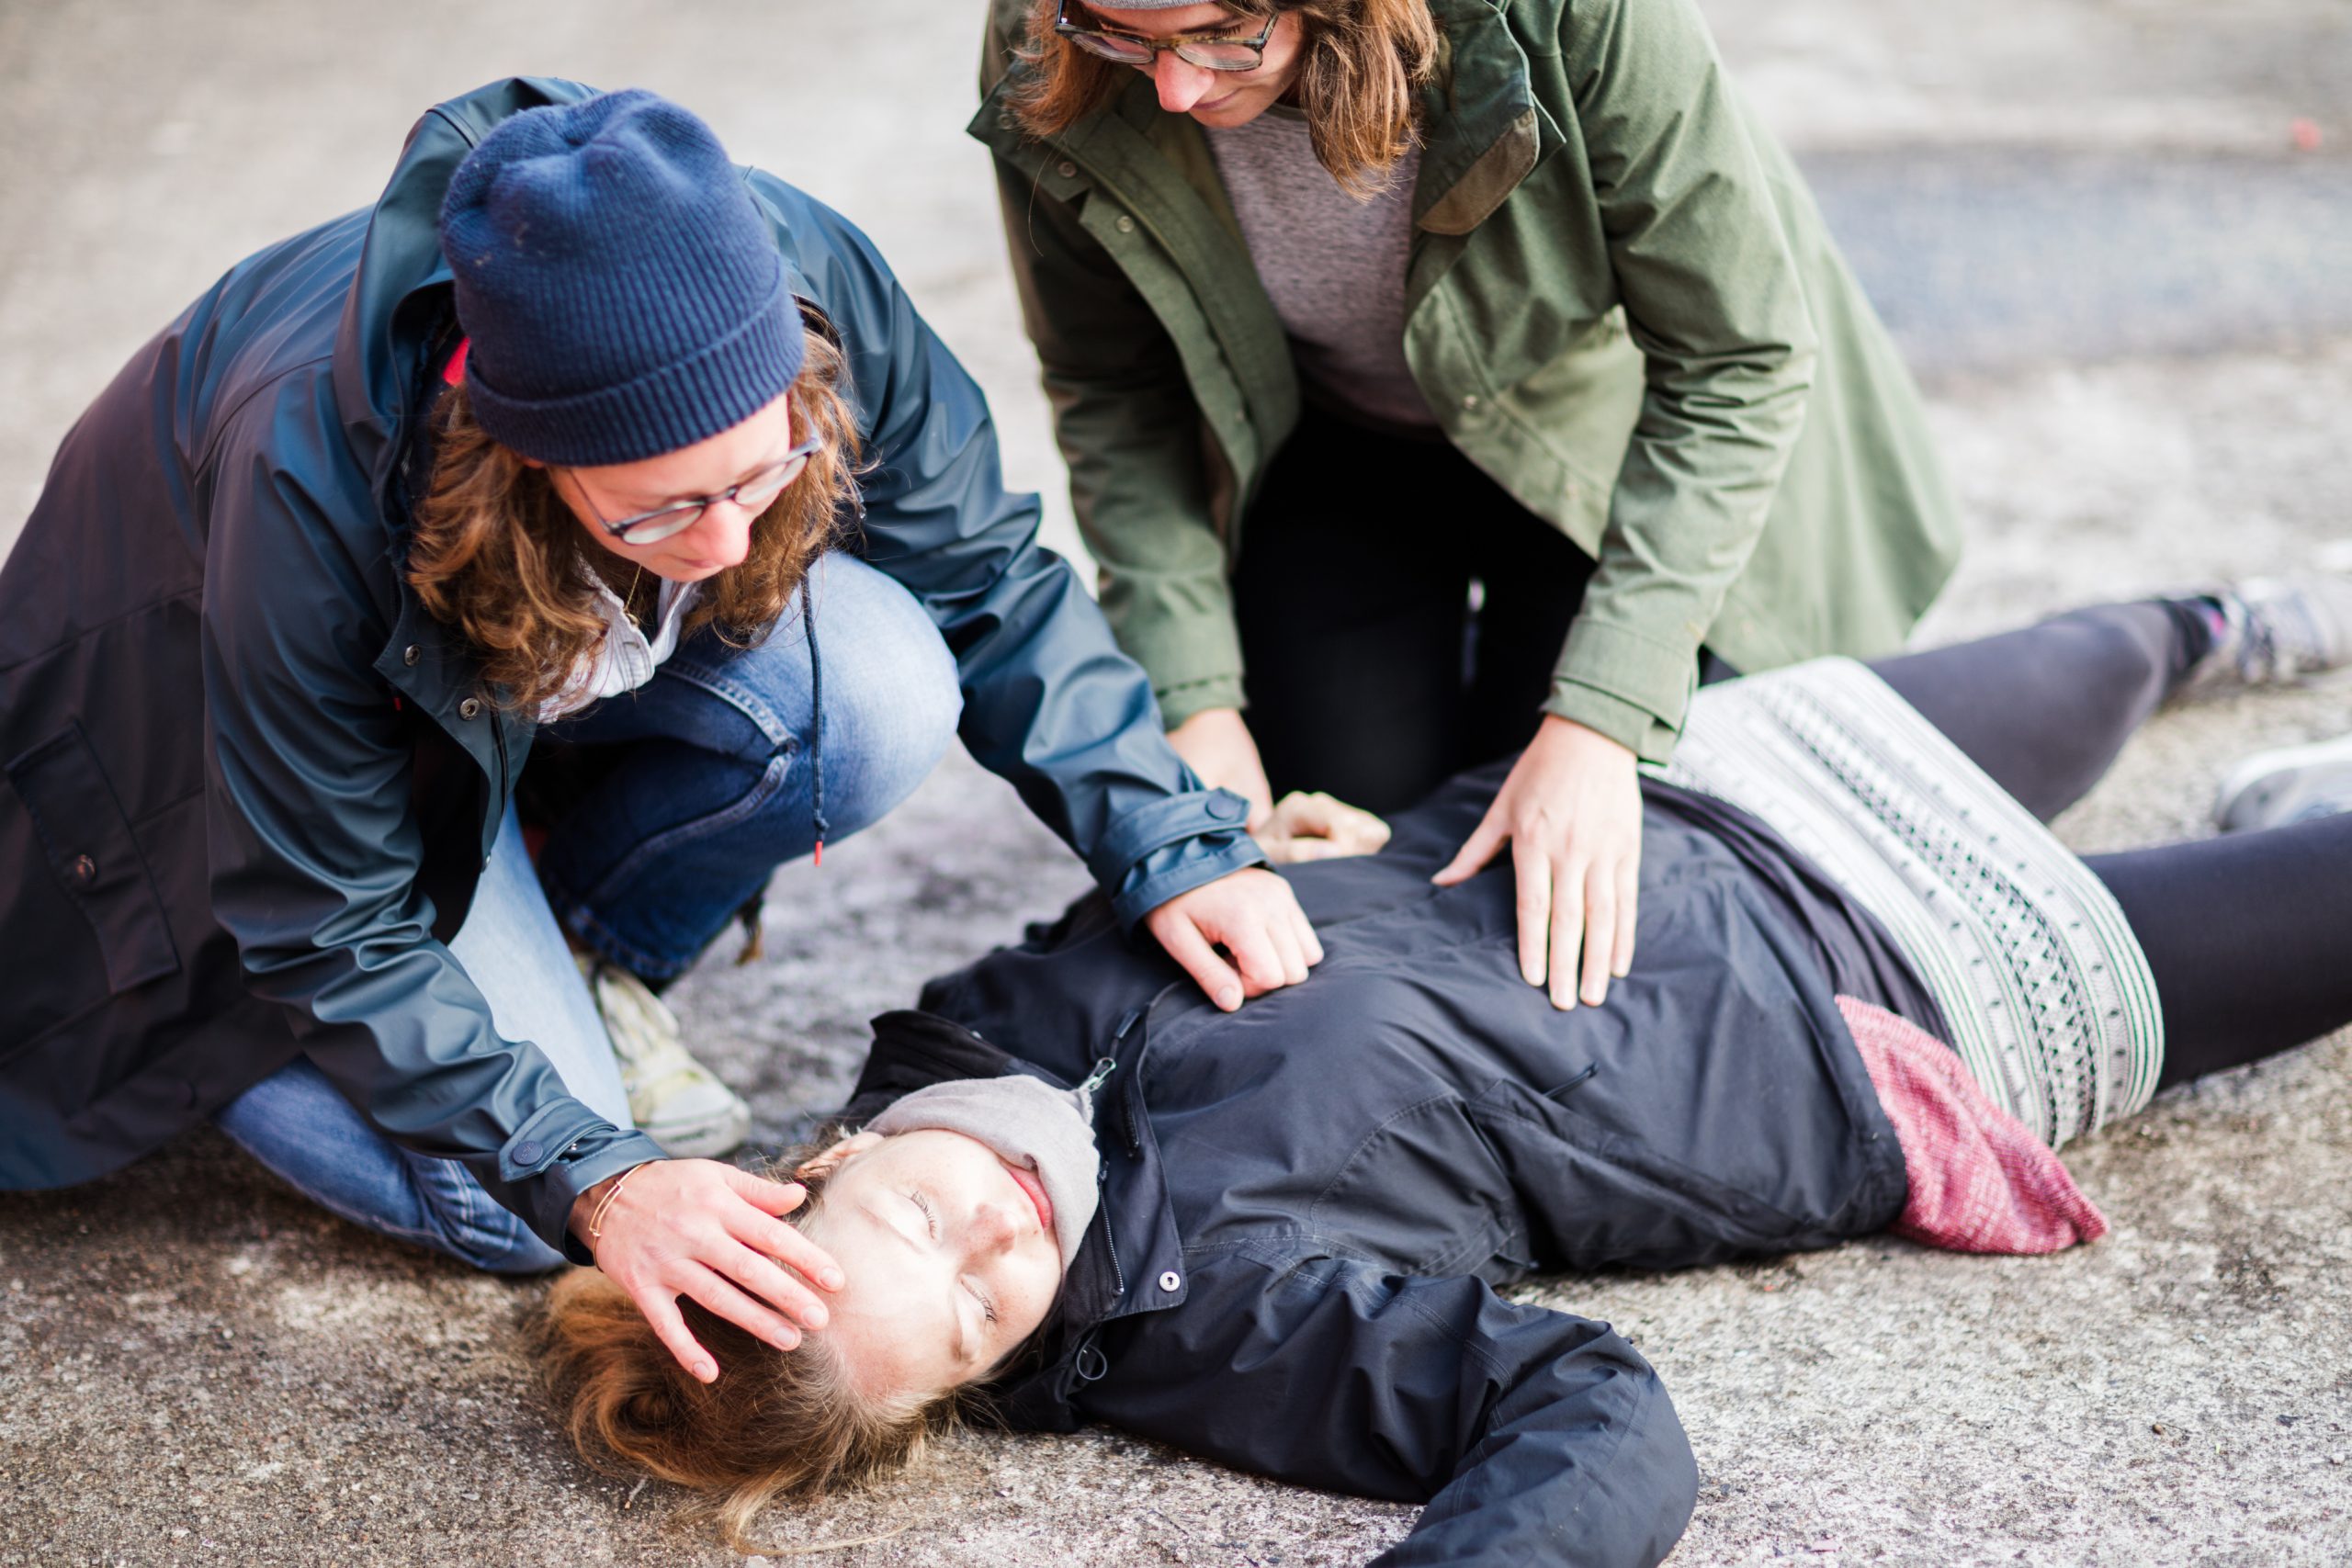 Two woman looking after unconscious woman